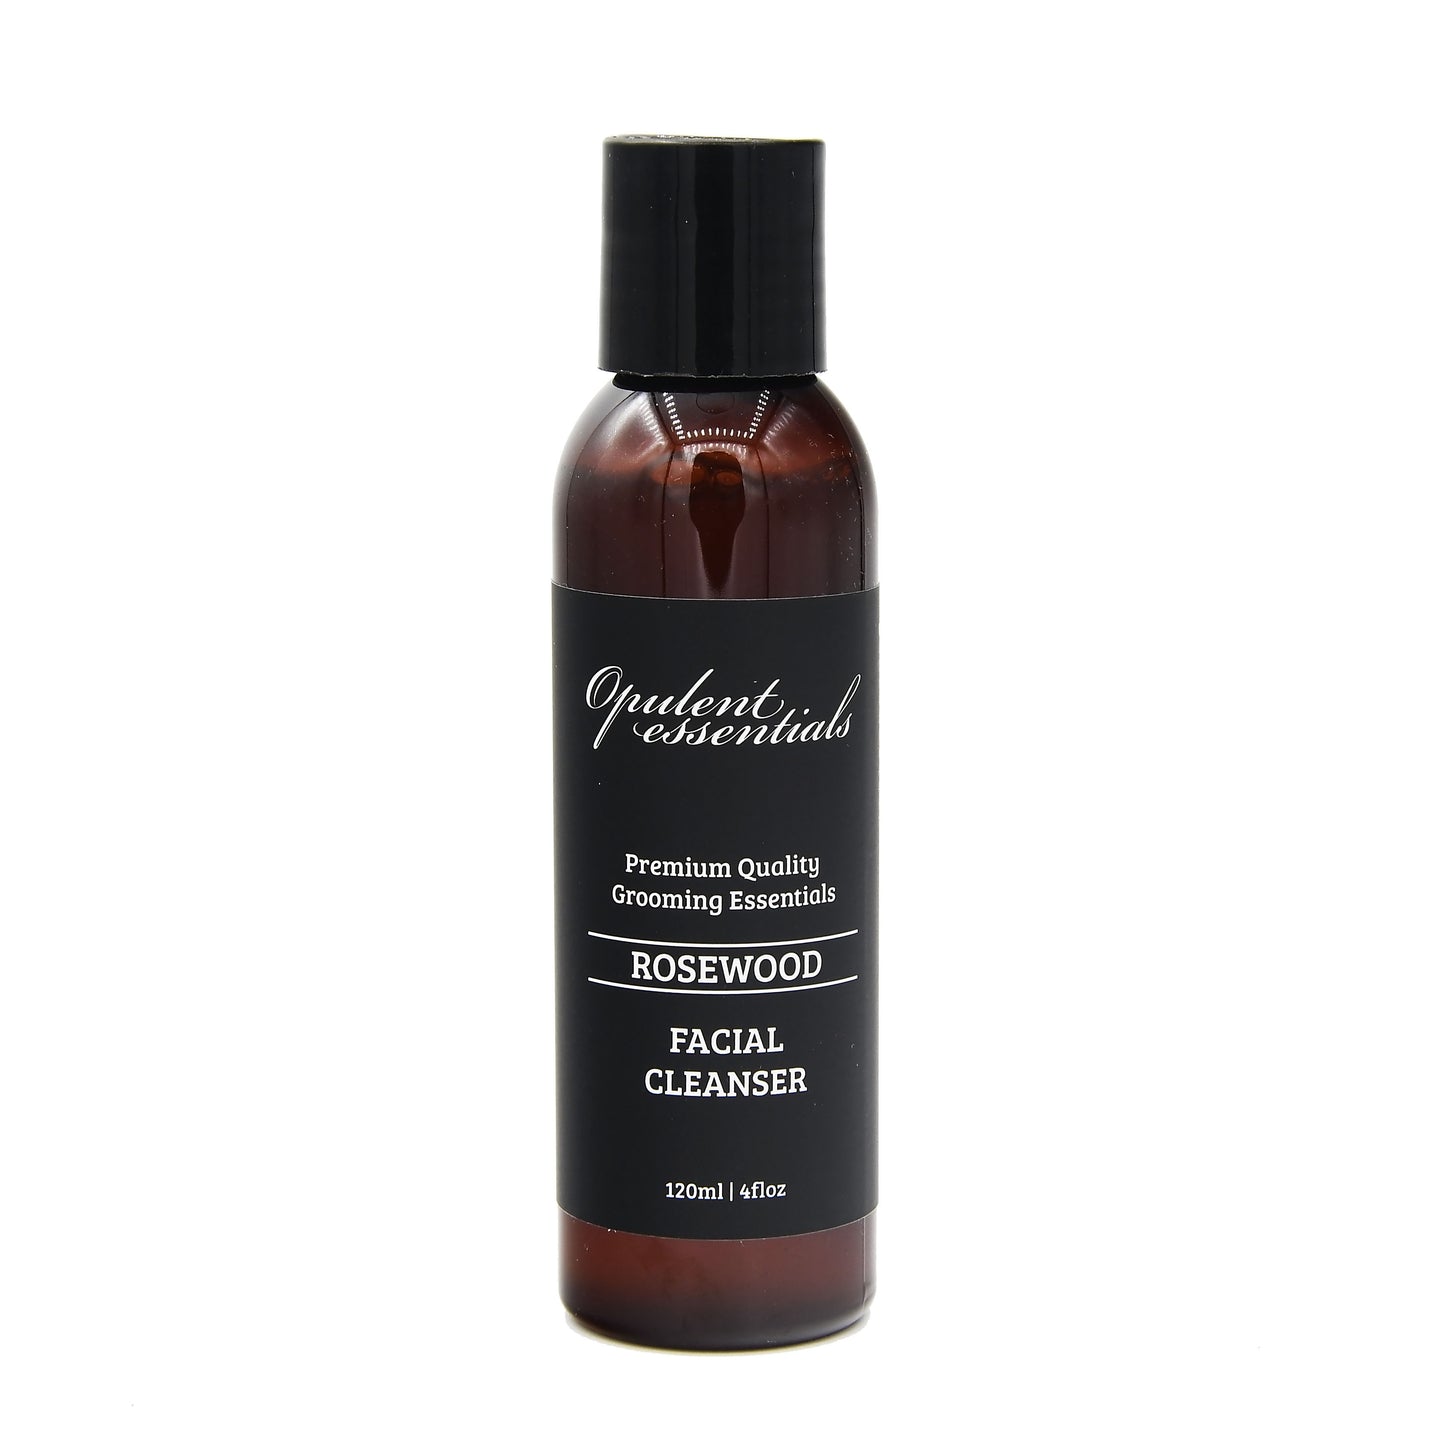 Rosewood Facial Cleanser